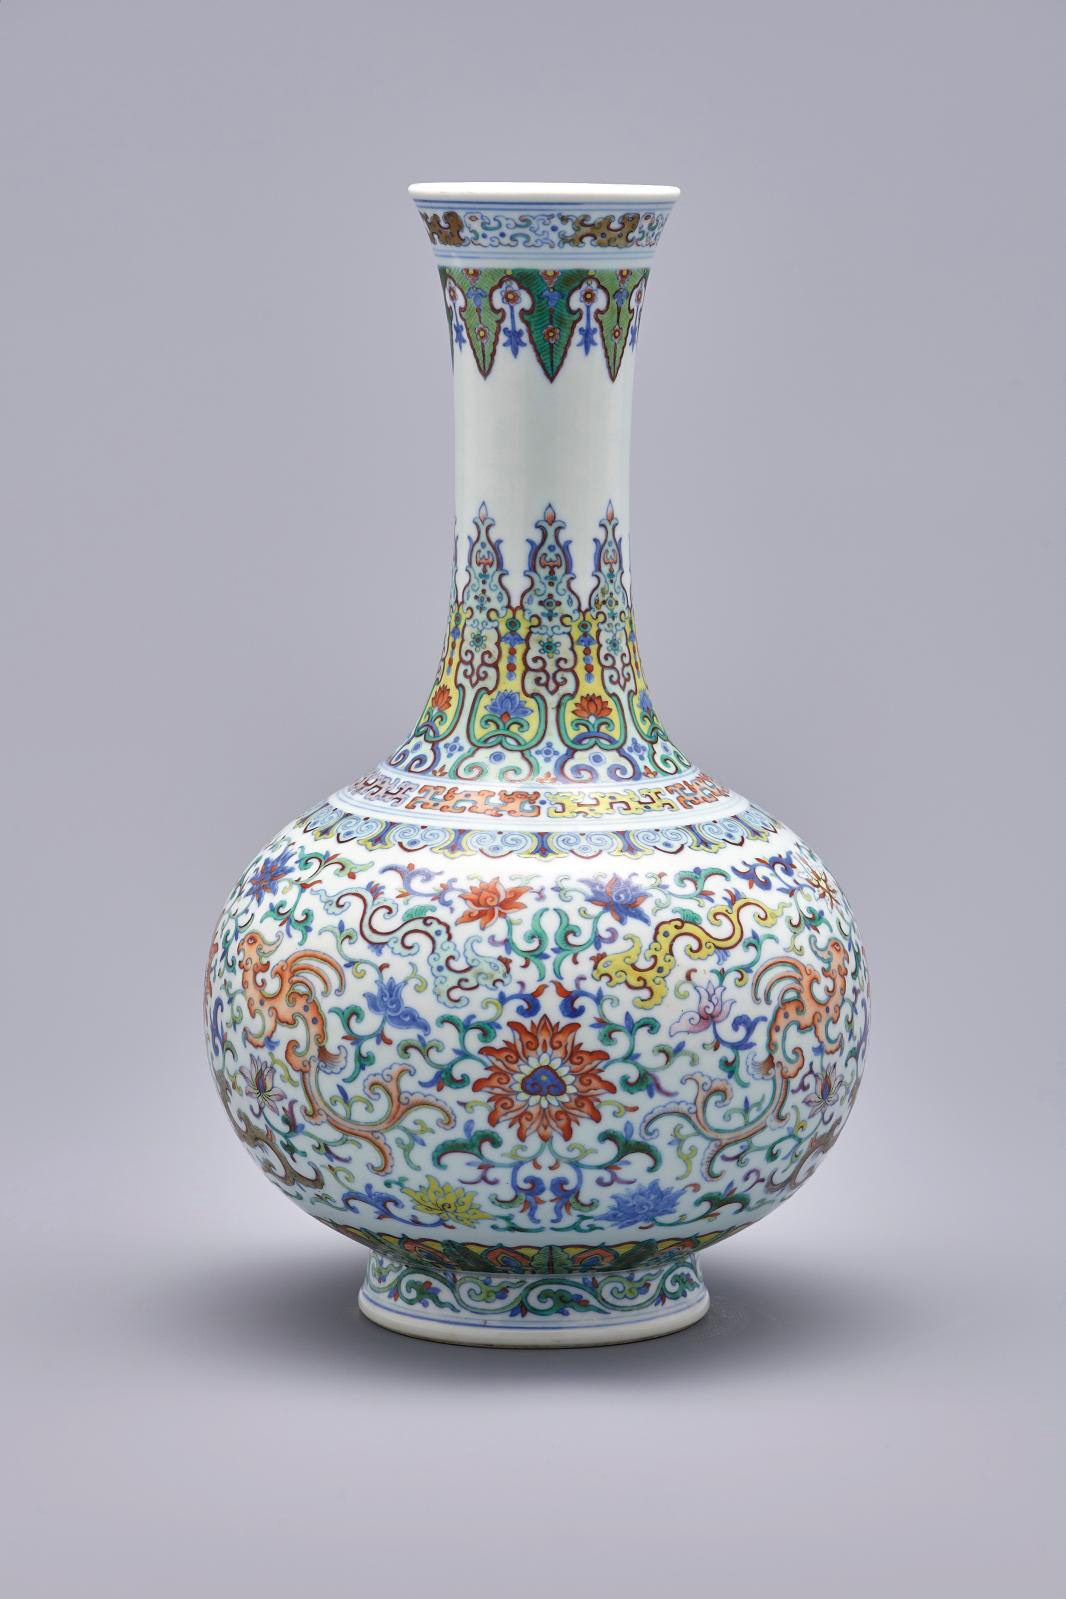 A Rare Shangping Vase From the Reign of Qianlong